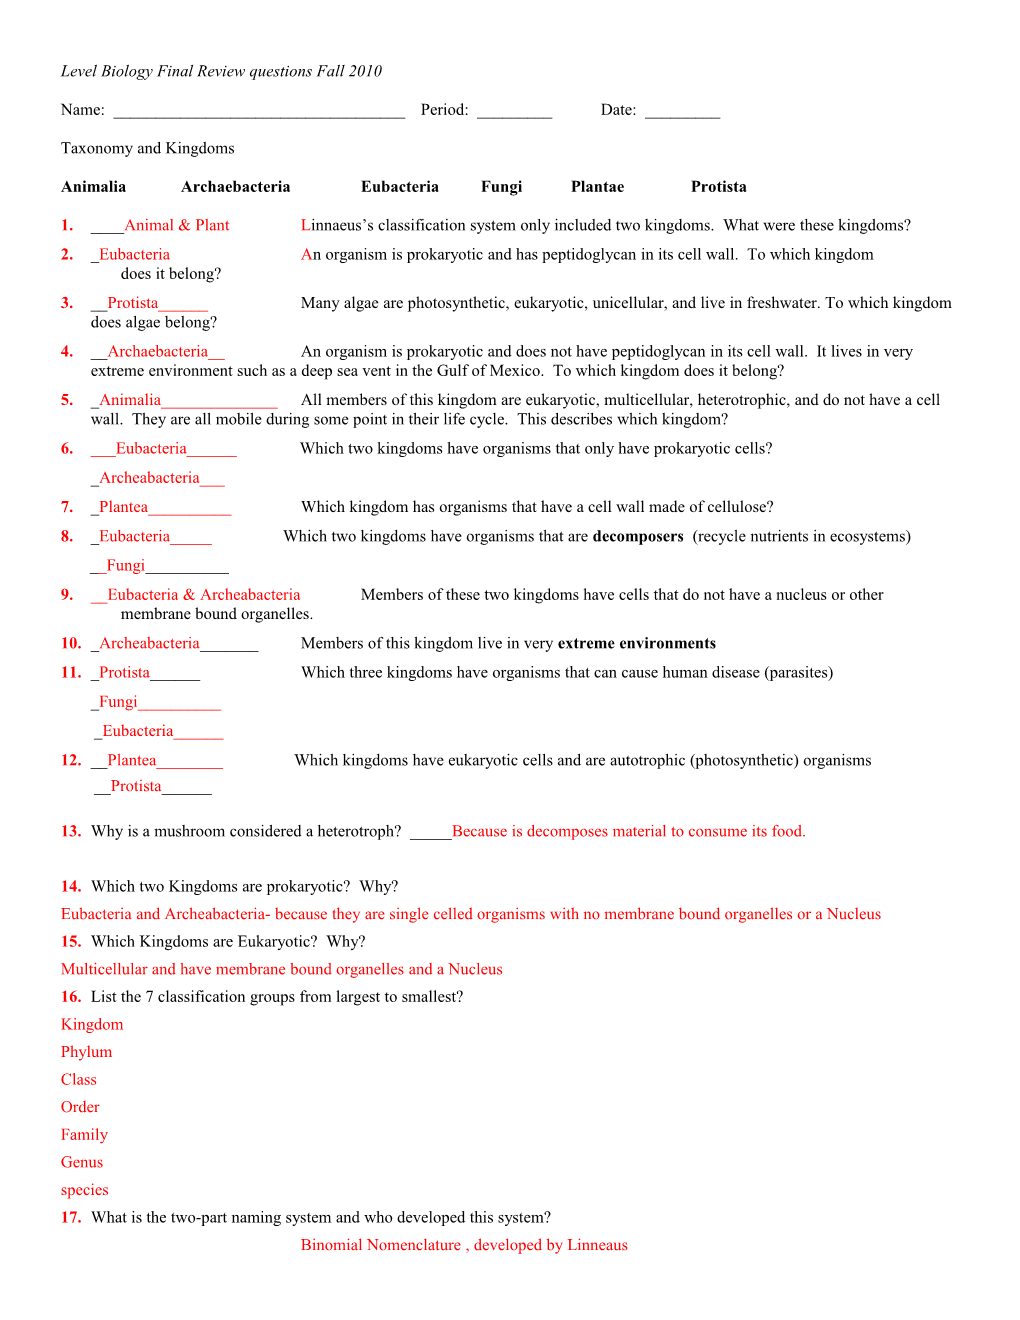 Level Biology Final Review Questions Fall 2010